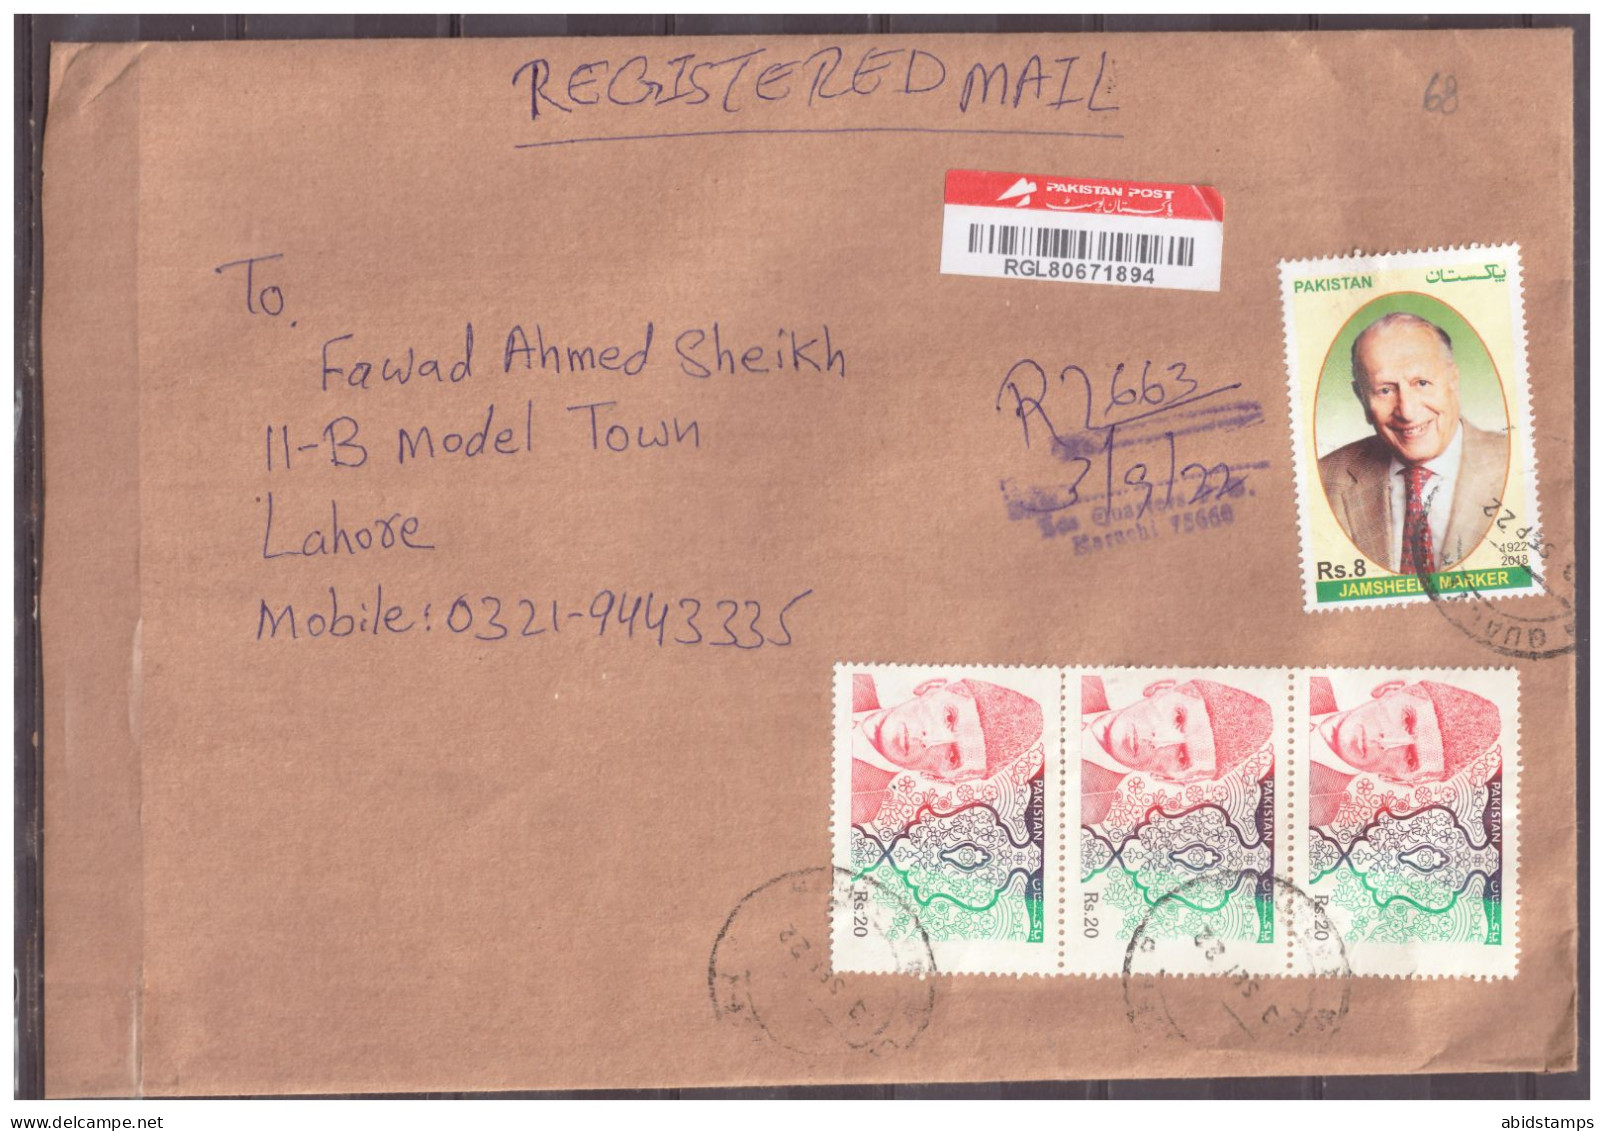 USED REGISTERED AIR MAIL DOMESTIC COVER PAKISTAN - Pakistan